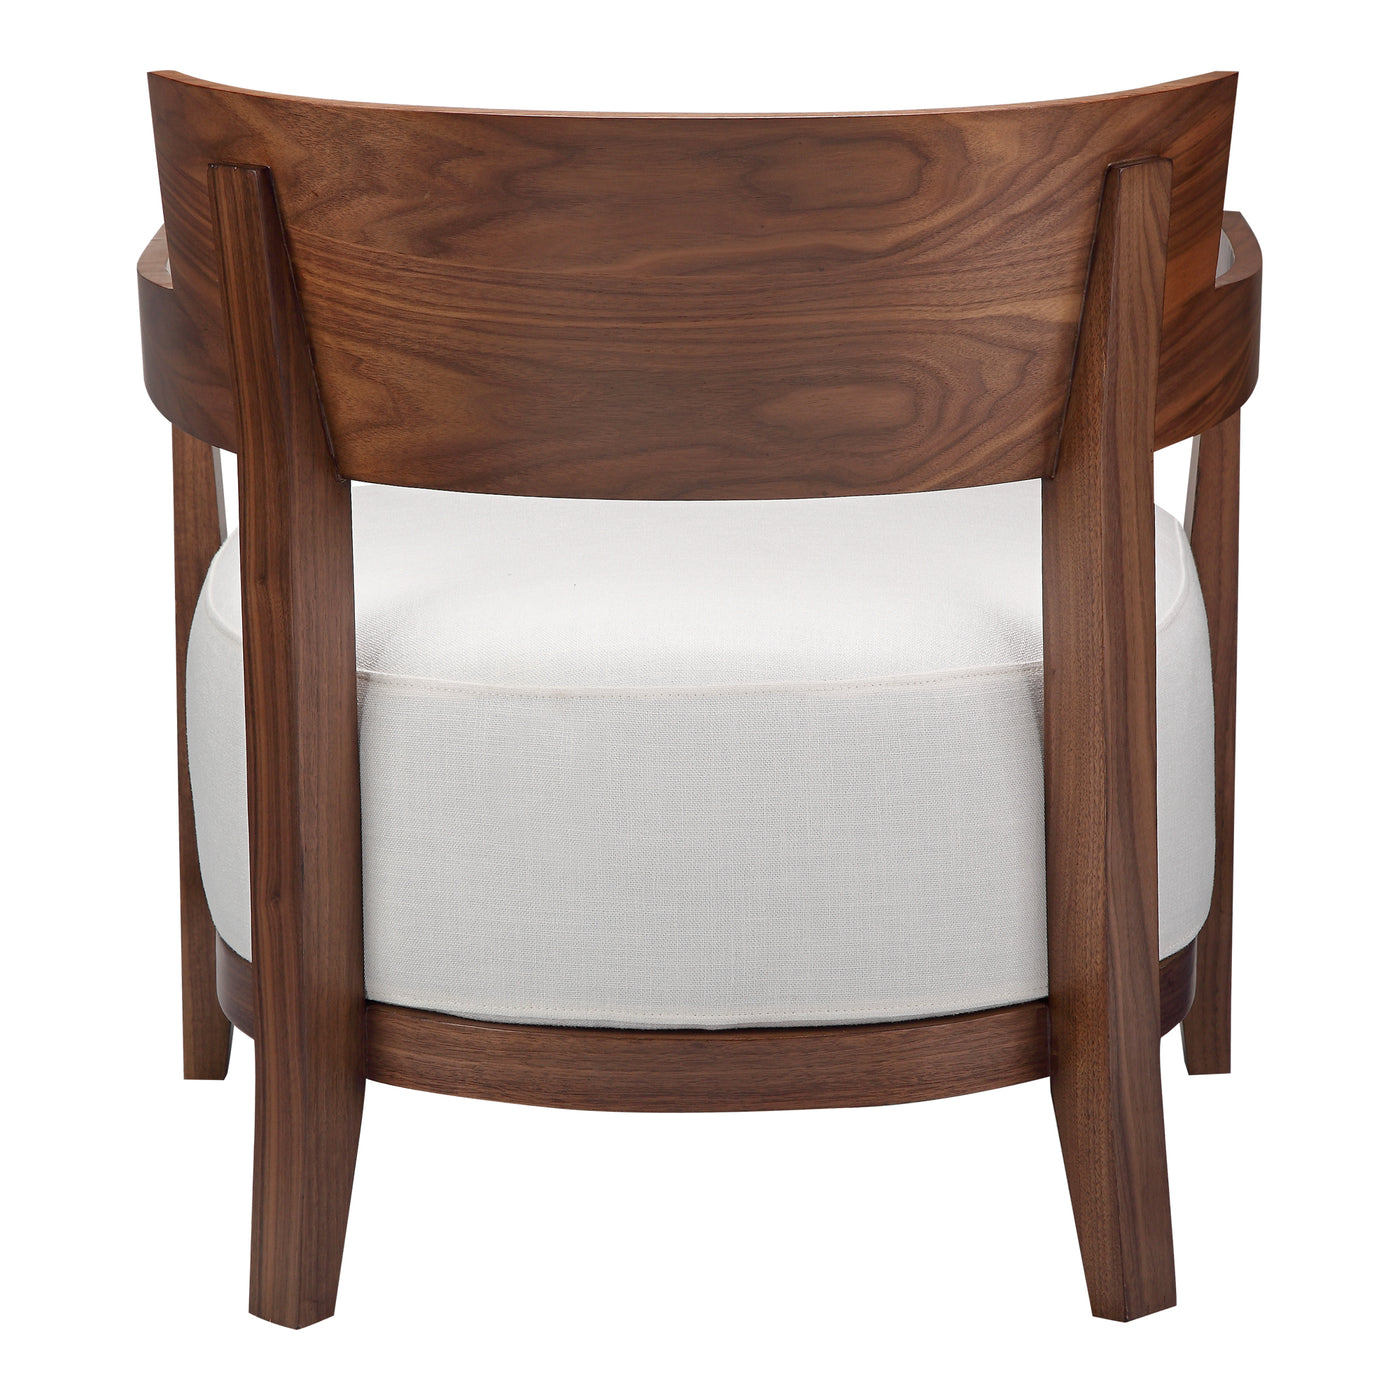 The Volta armchair will never let you down when it comes to comfort and style. Its expertly crafted solid wood frame provi...